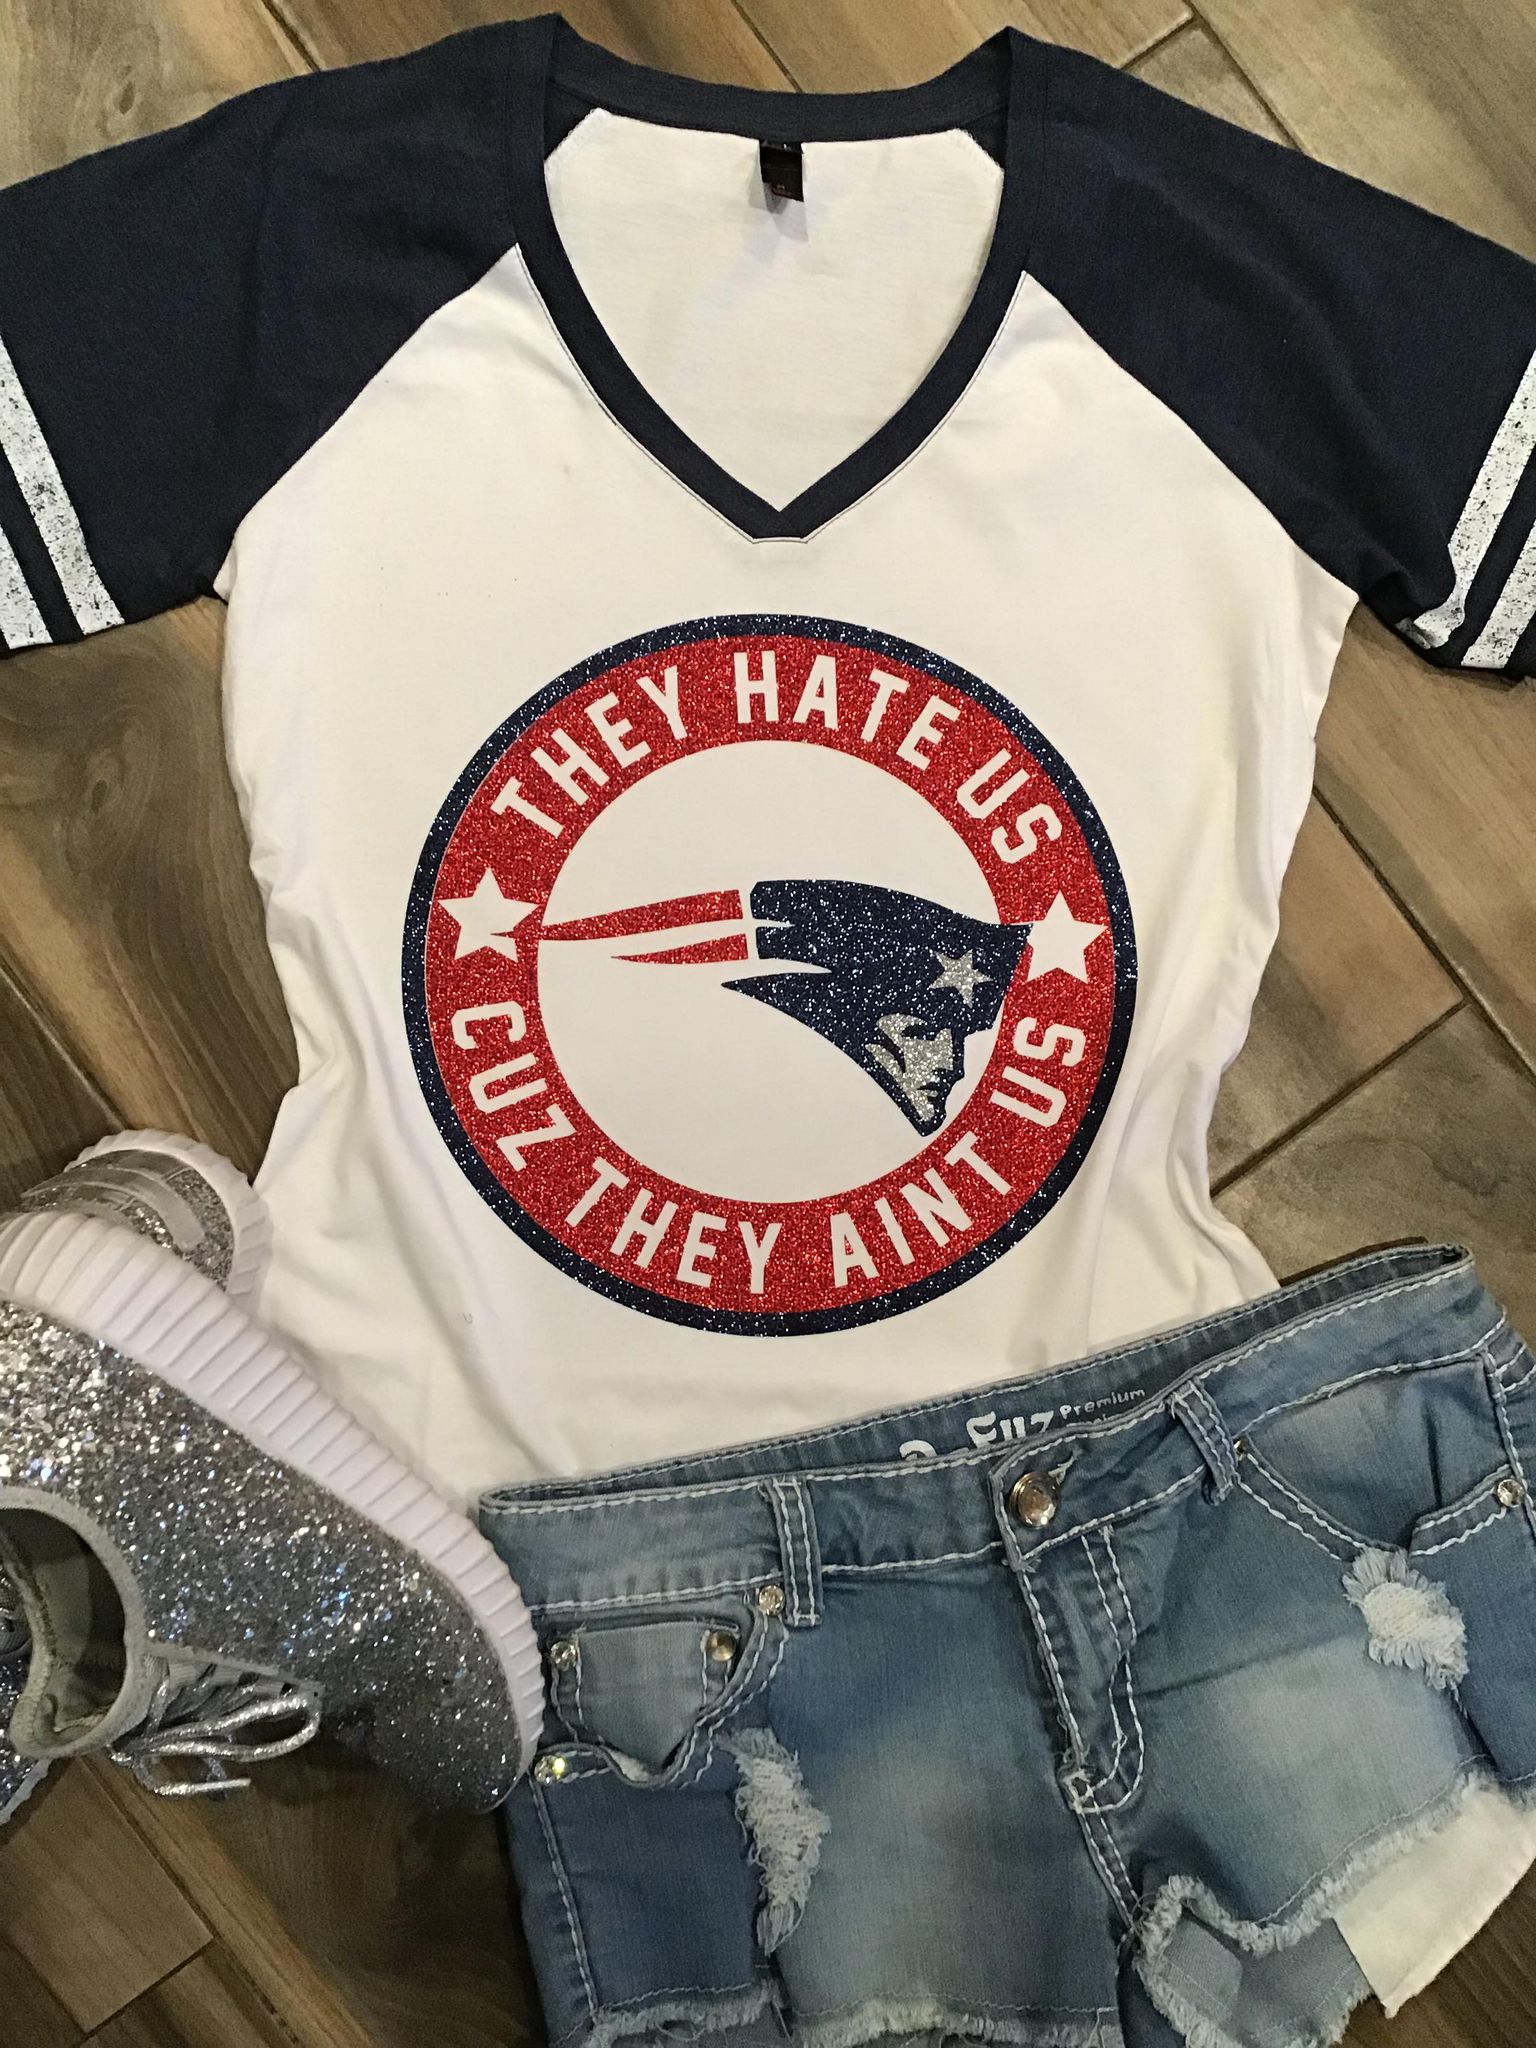 New England Patriots Inspired They Hate Us Cuz They Ain't Us Glitter Shirt